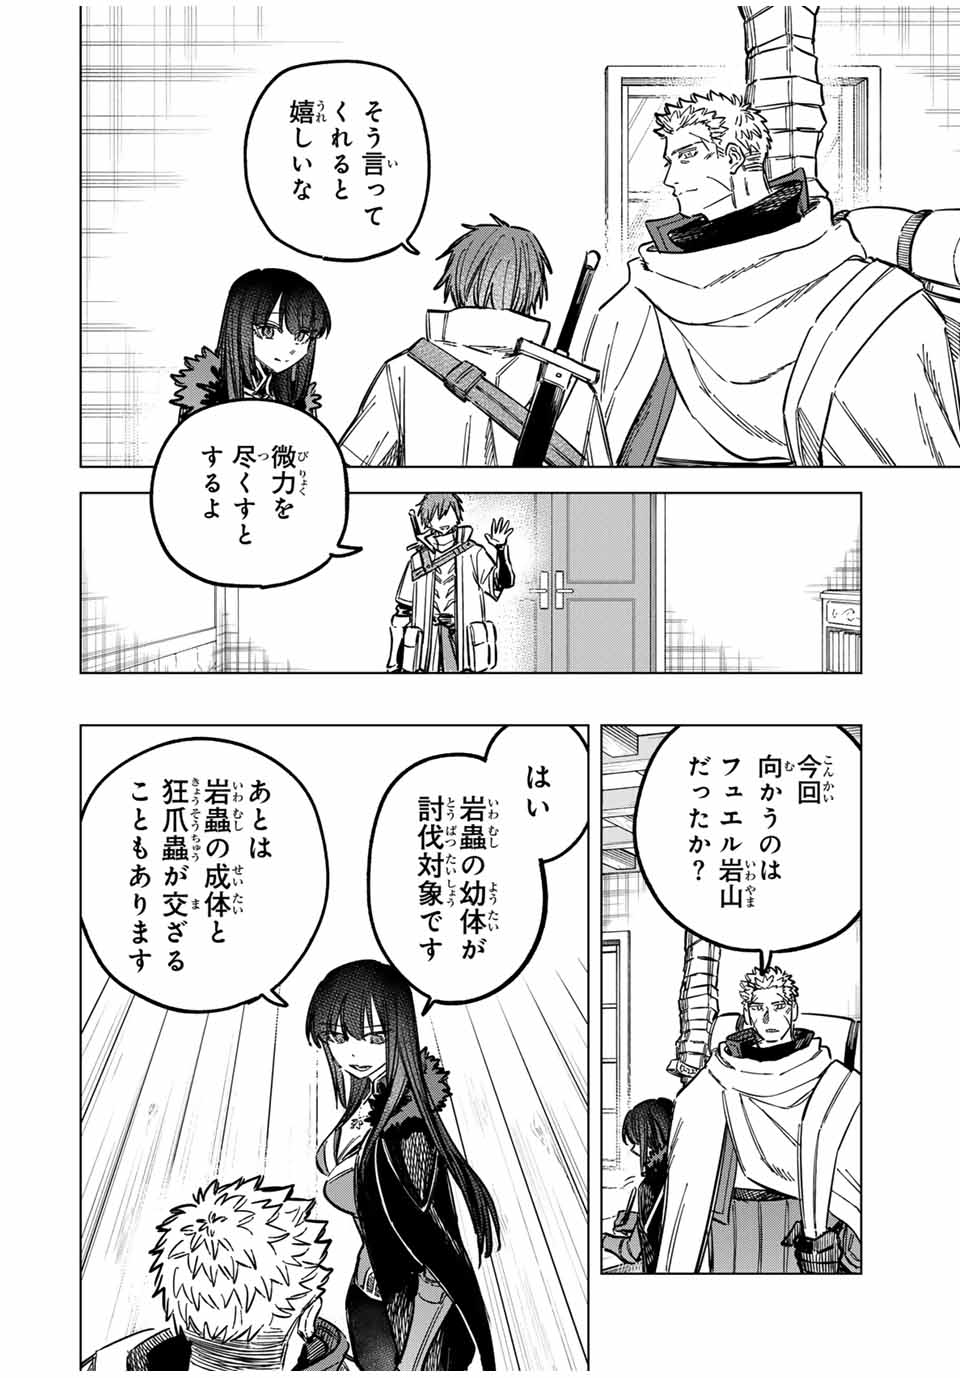 Witch and Mercenary 魔女と傭兵 第16話 - Page 10